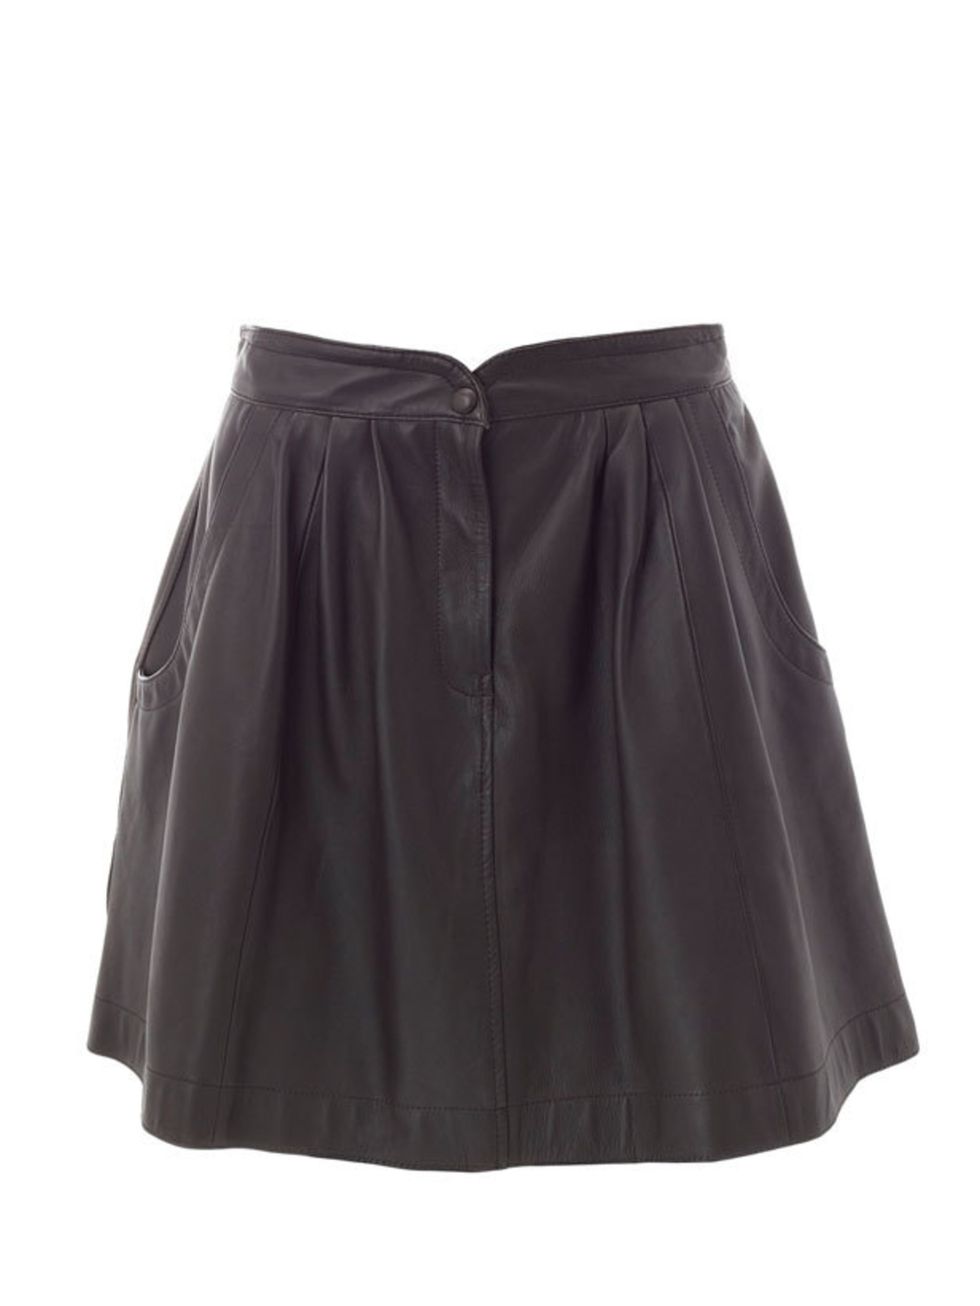 <p>Whistles brown leather skirt, £175, for stockists call 0845 899 1222</p>